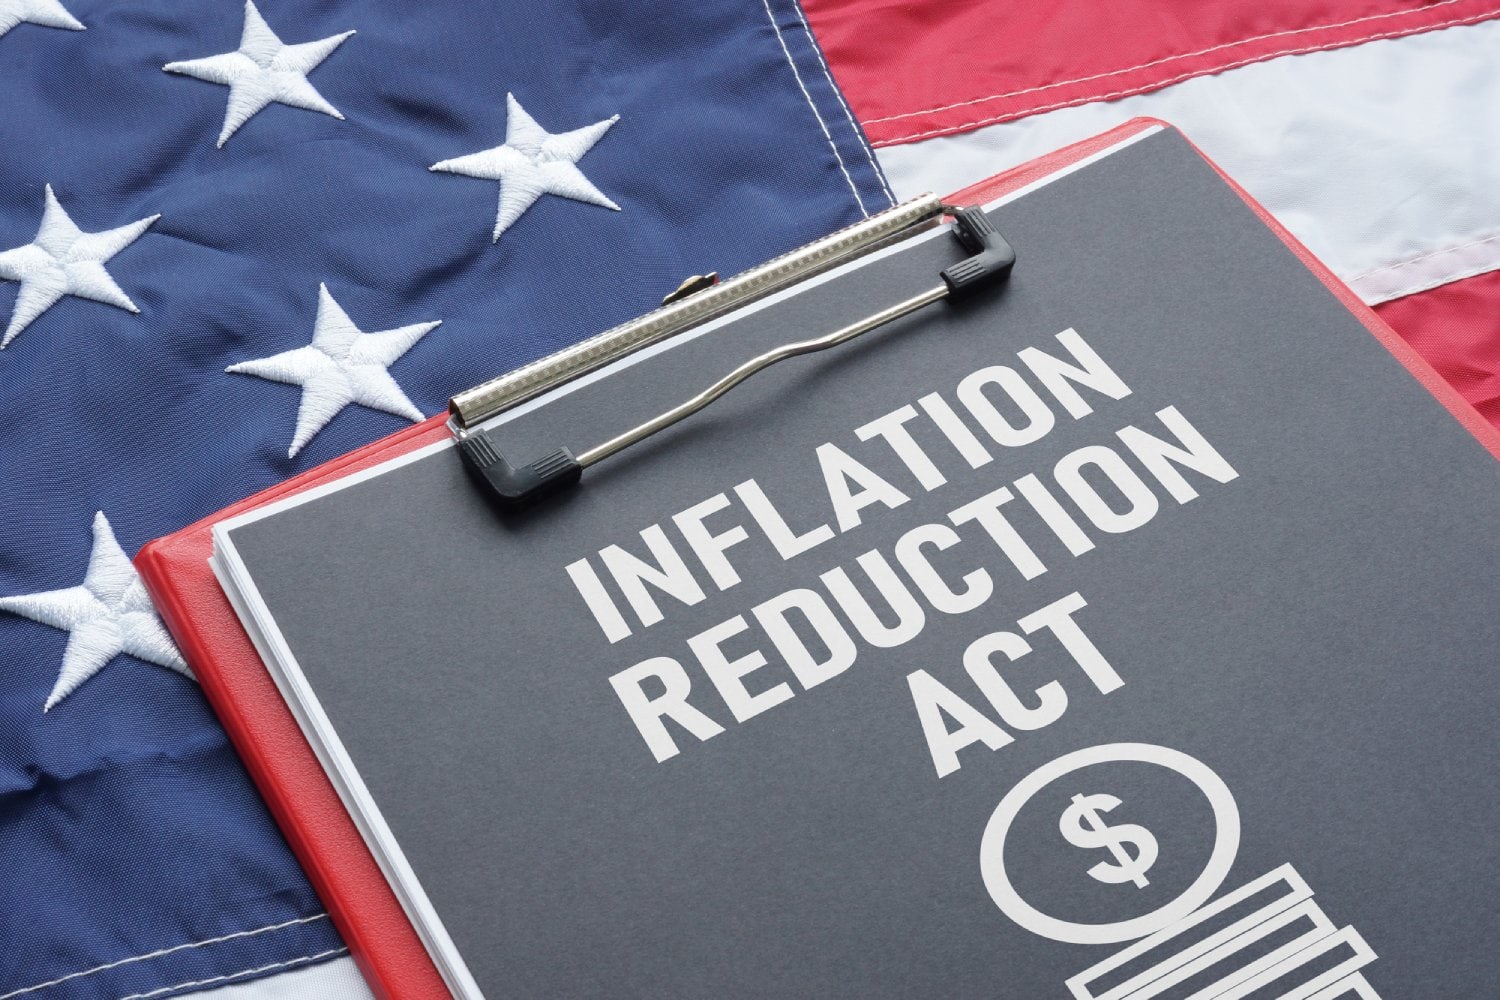 Inflation Reduction Act Insulation Rebate